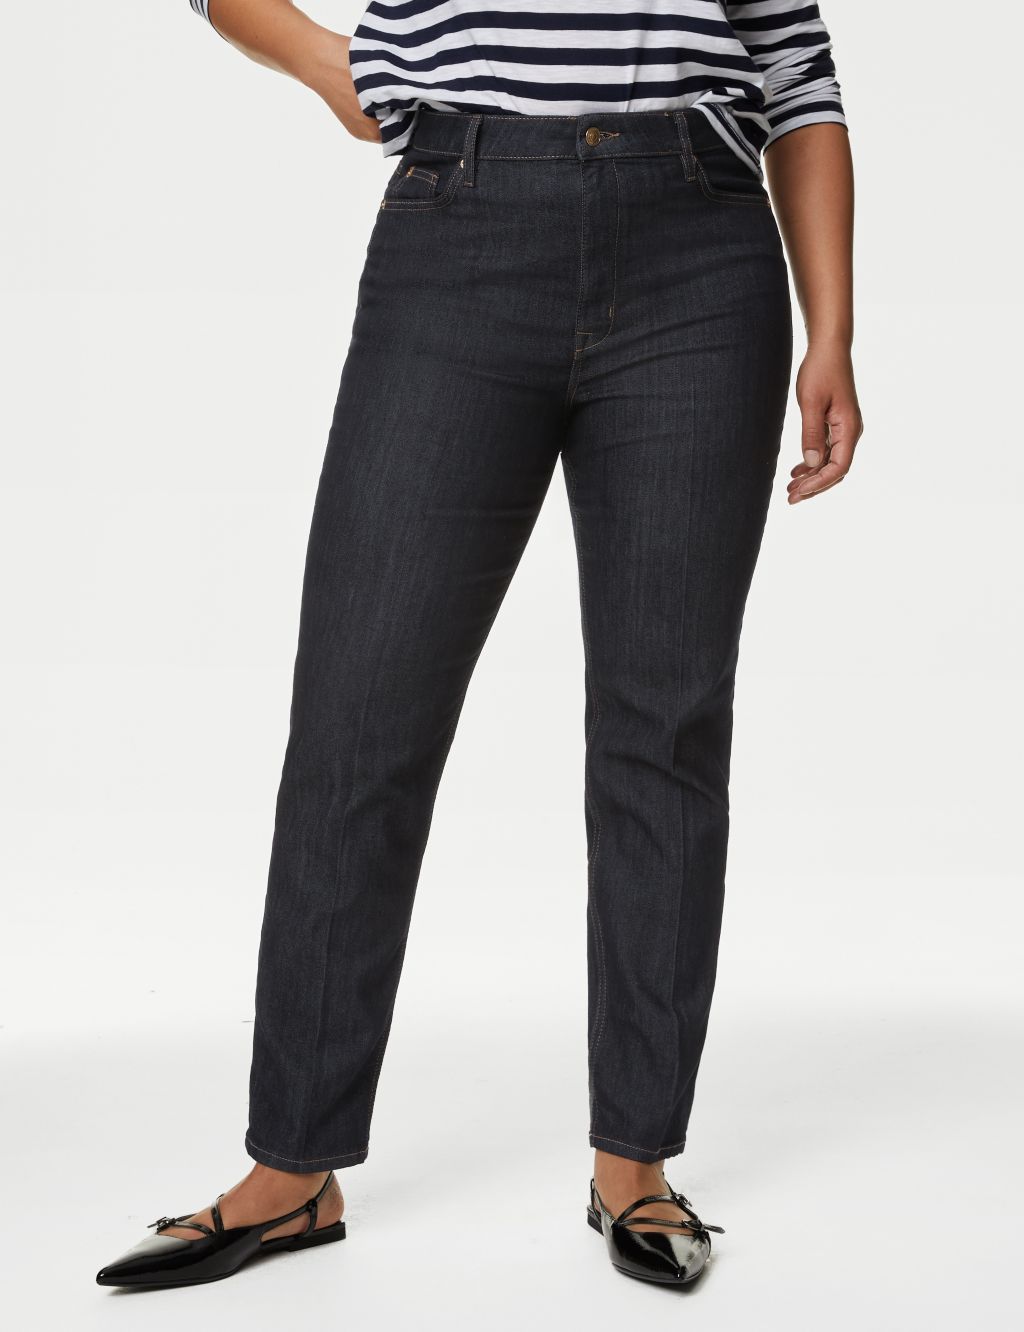 Sienna High Waisted Smart Jeans image 3